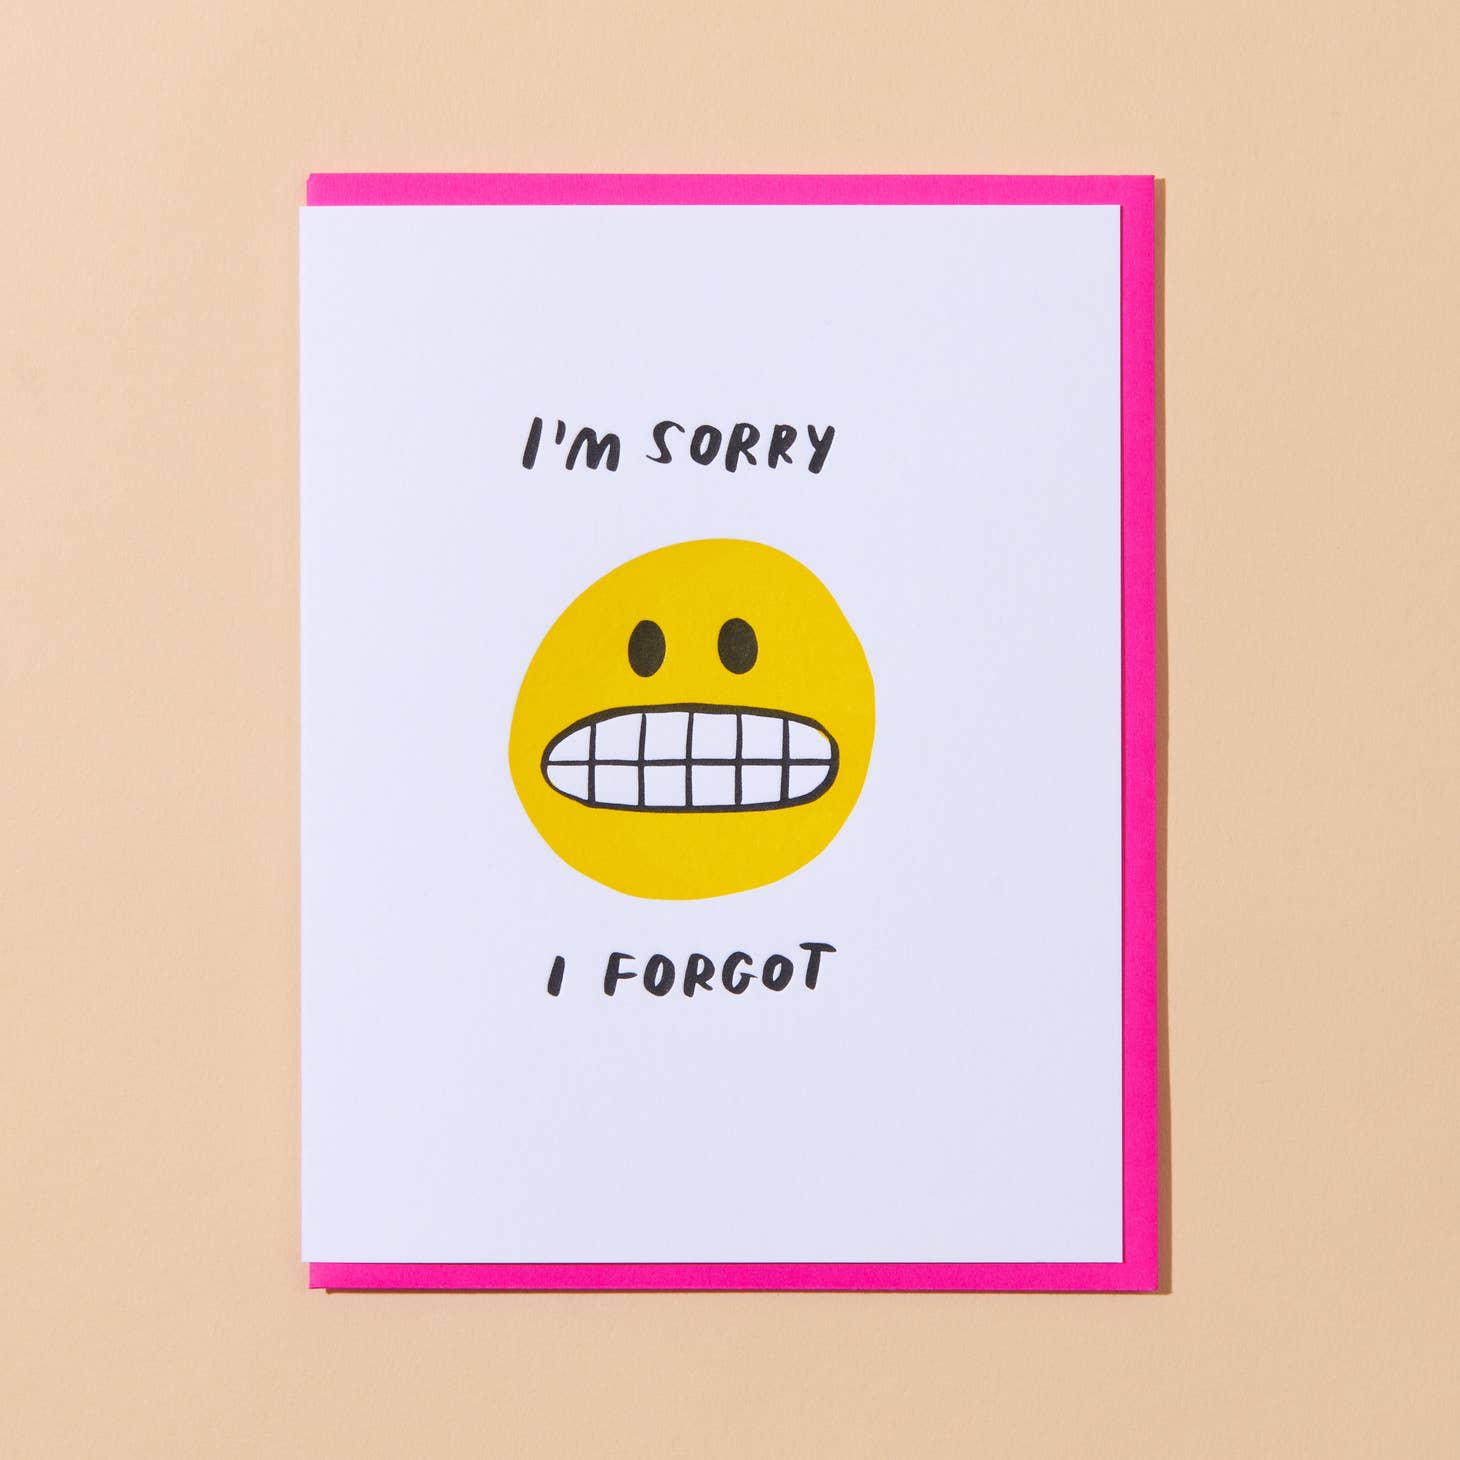 White card with yellow image of smiling face with toothy grin saying “I’m sorry" and "I forgot” in black text. Hot pink envelope included.     